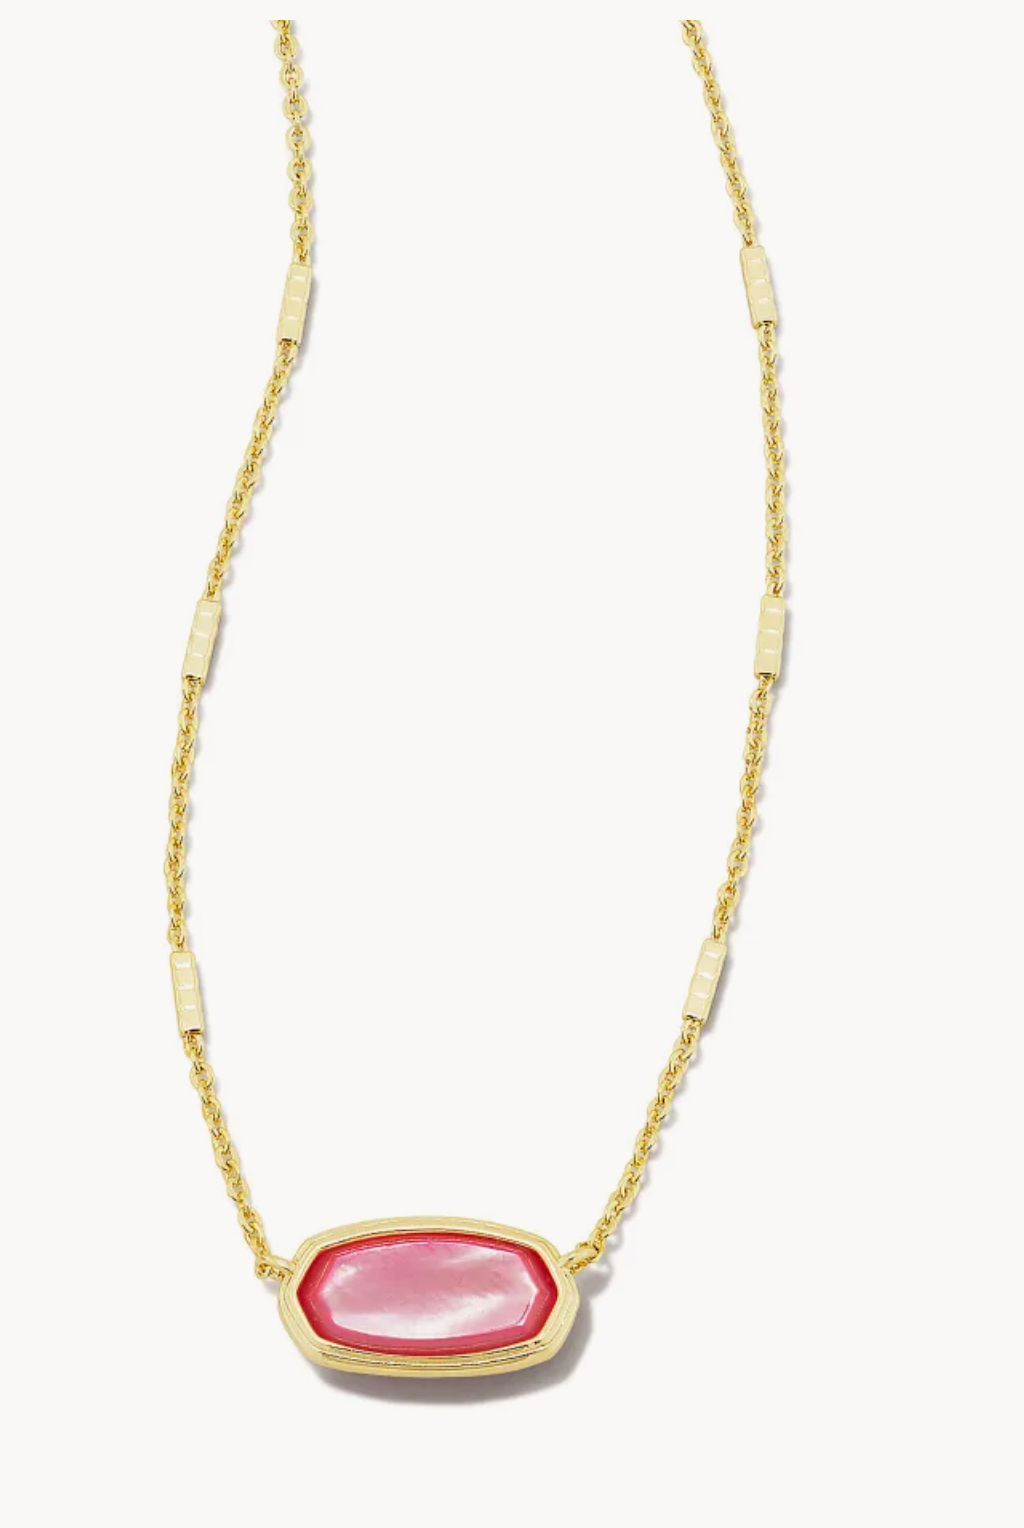 Kendra Scott Framed Elisa Gold Short Pendant Necklace in Peony Mother-of-Pearl